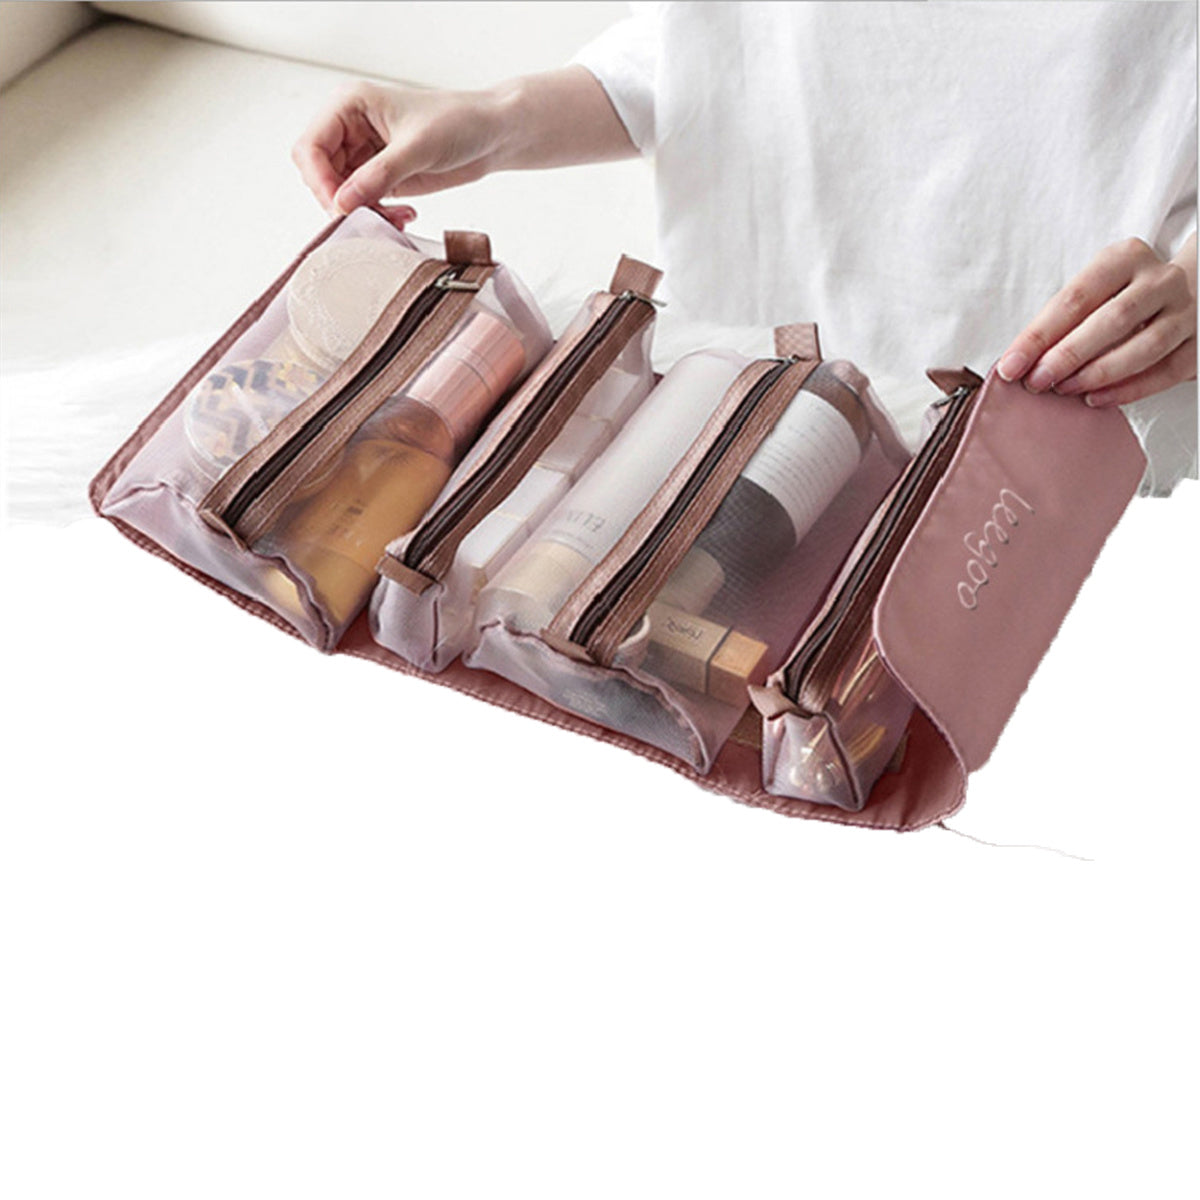 Detachable Cosmetic Bag with 4 IN 1 Removable Portable Toiletry Compartment.